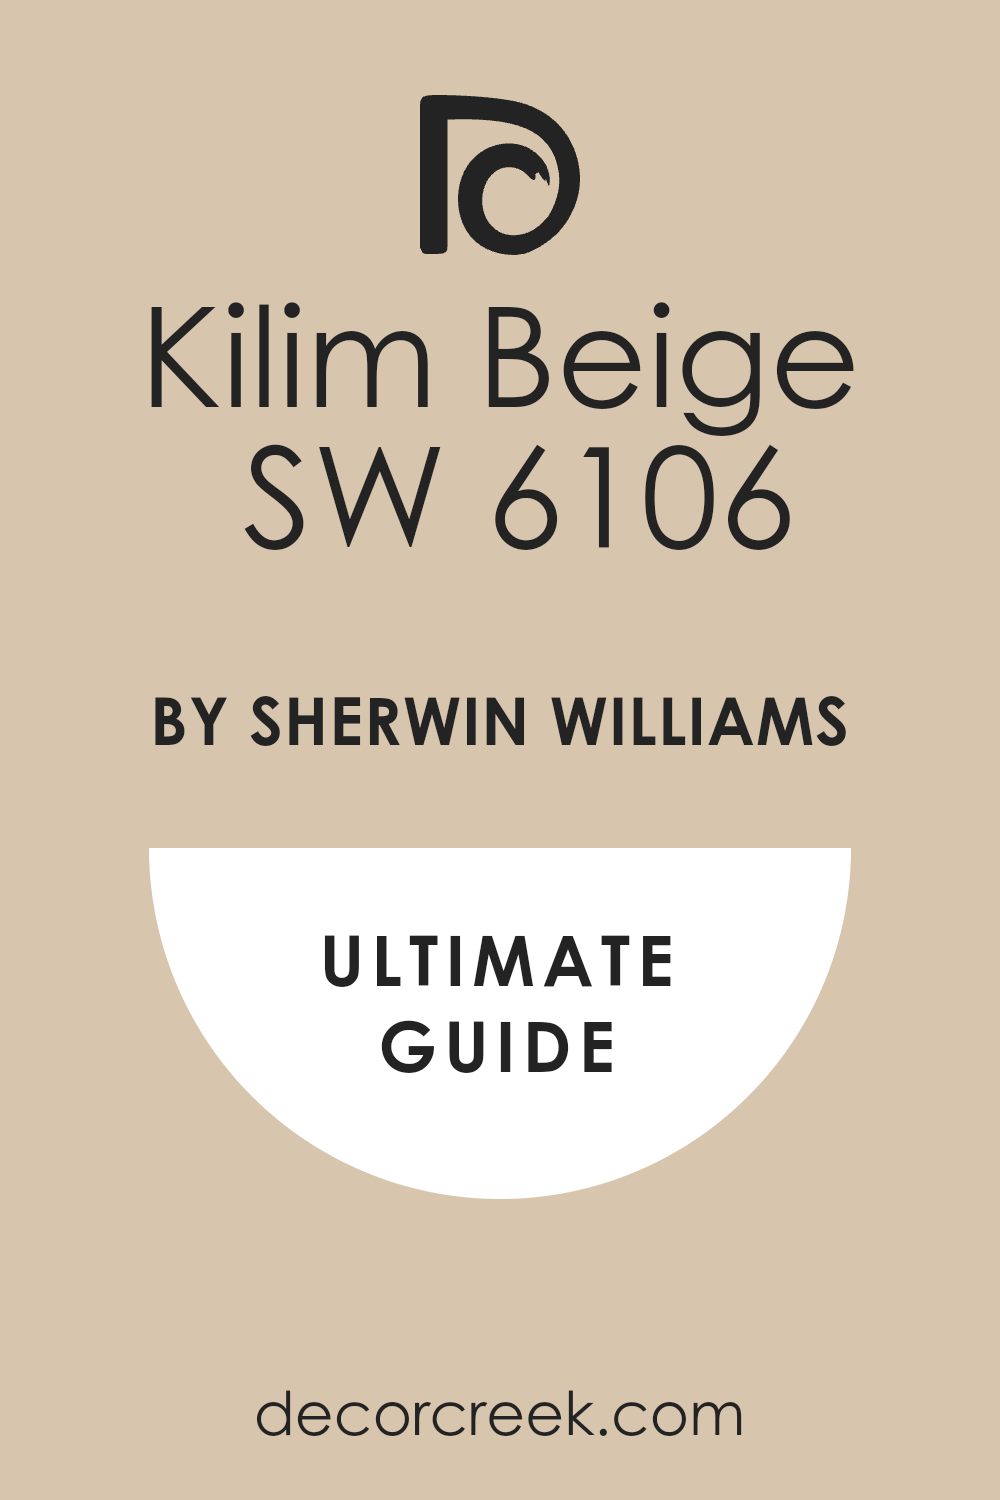 kilim_beige_sw_6106_paint_color_by_sherwin_williams_ultimate_guide